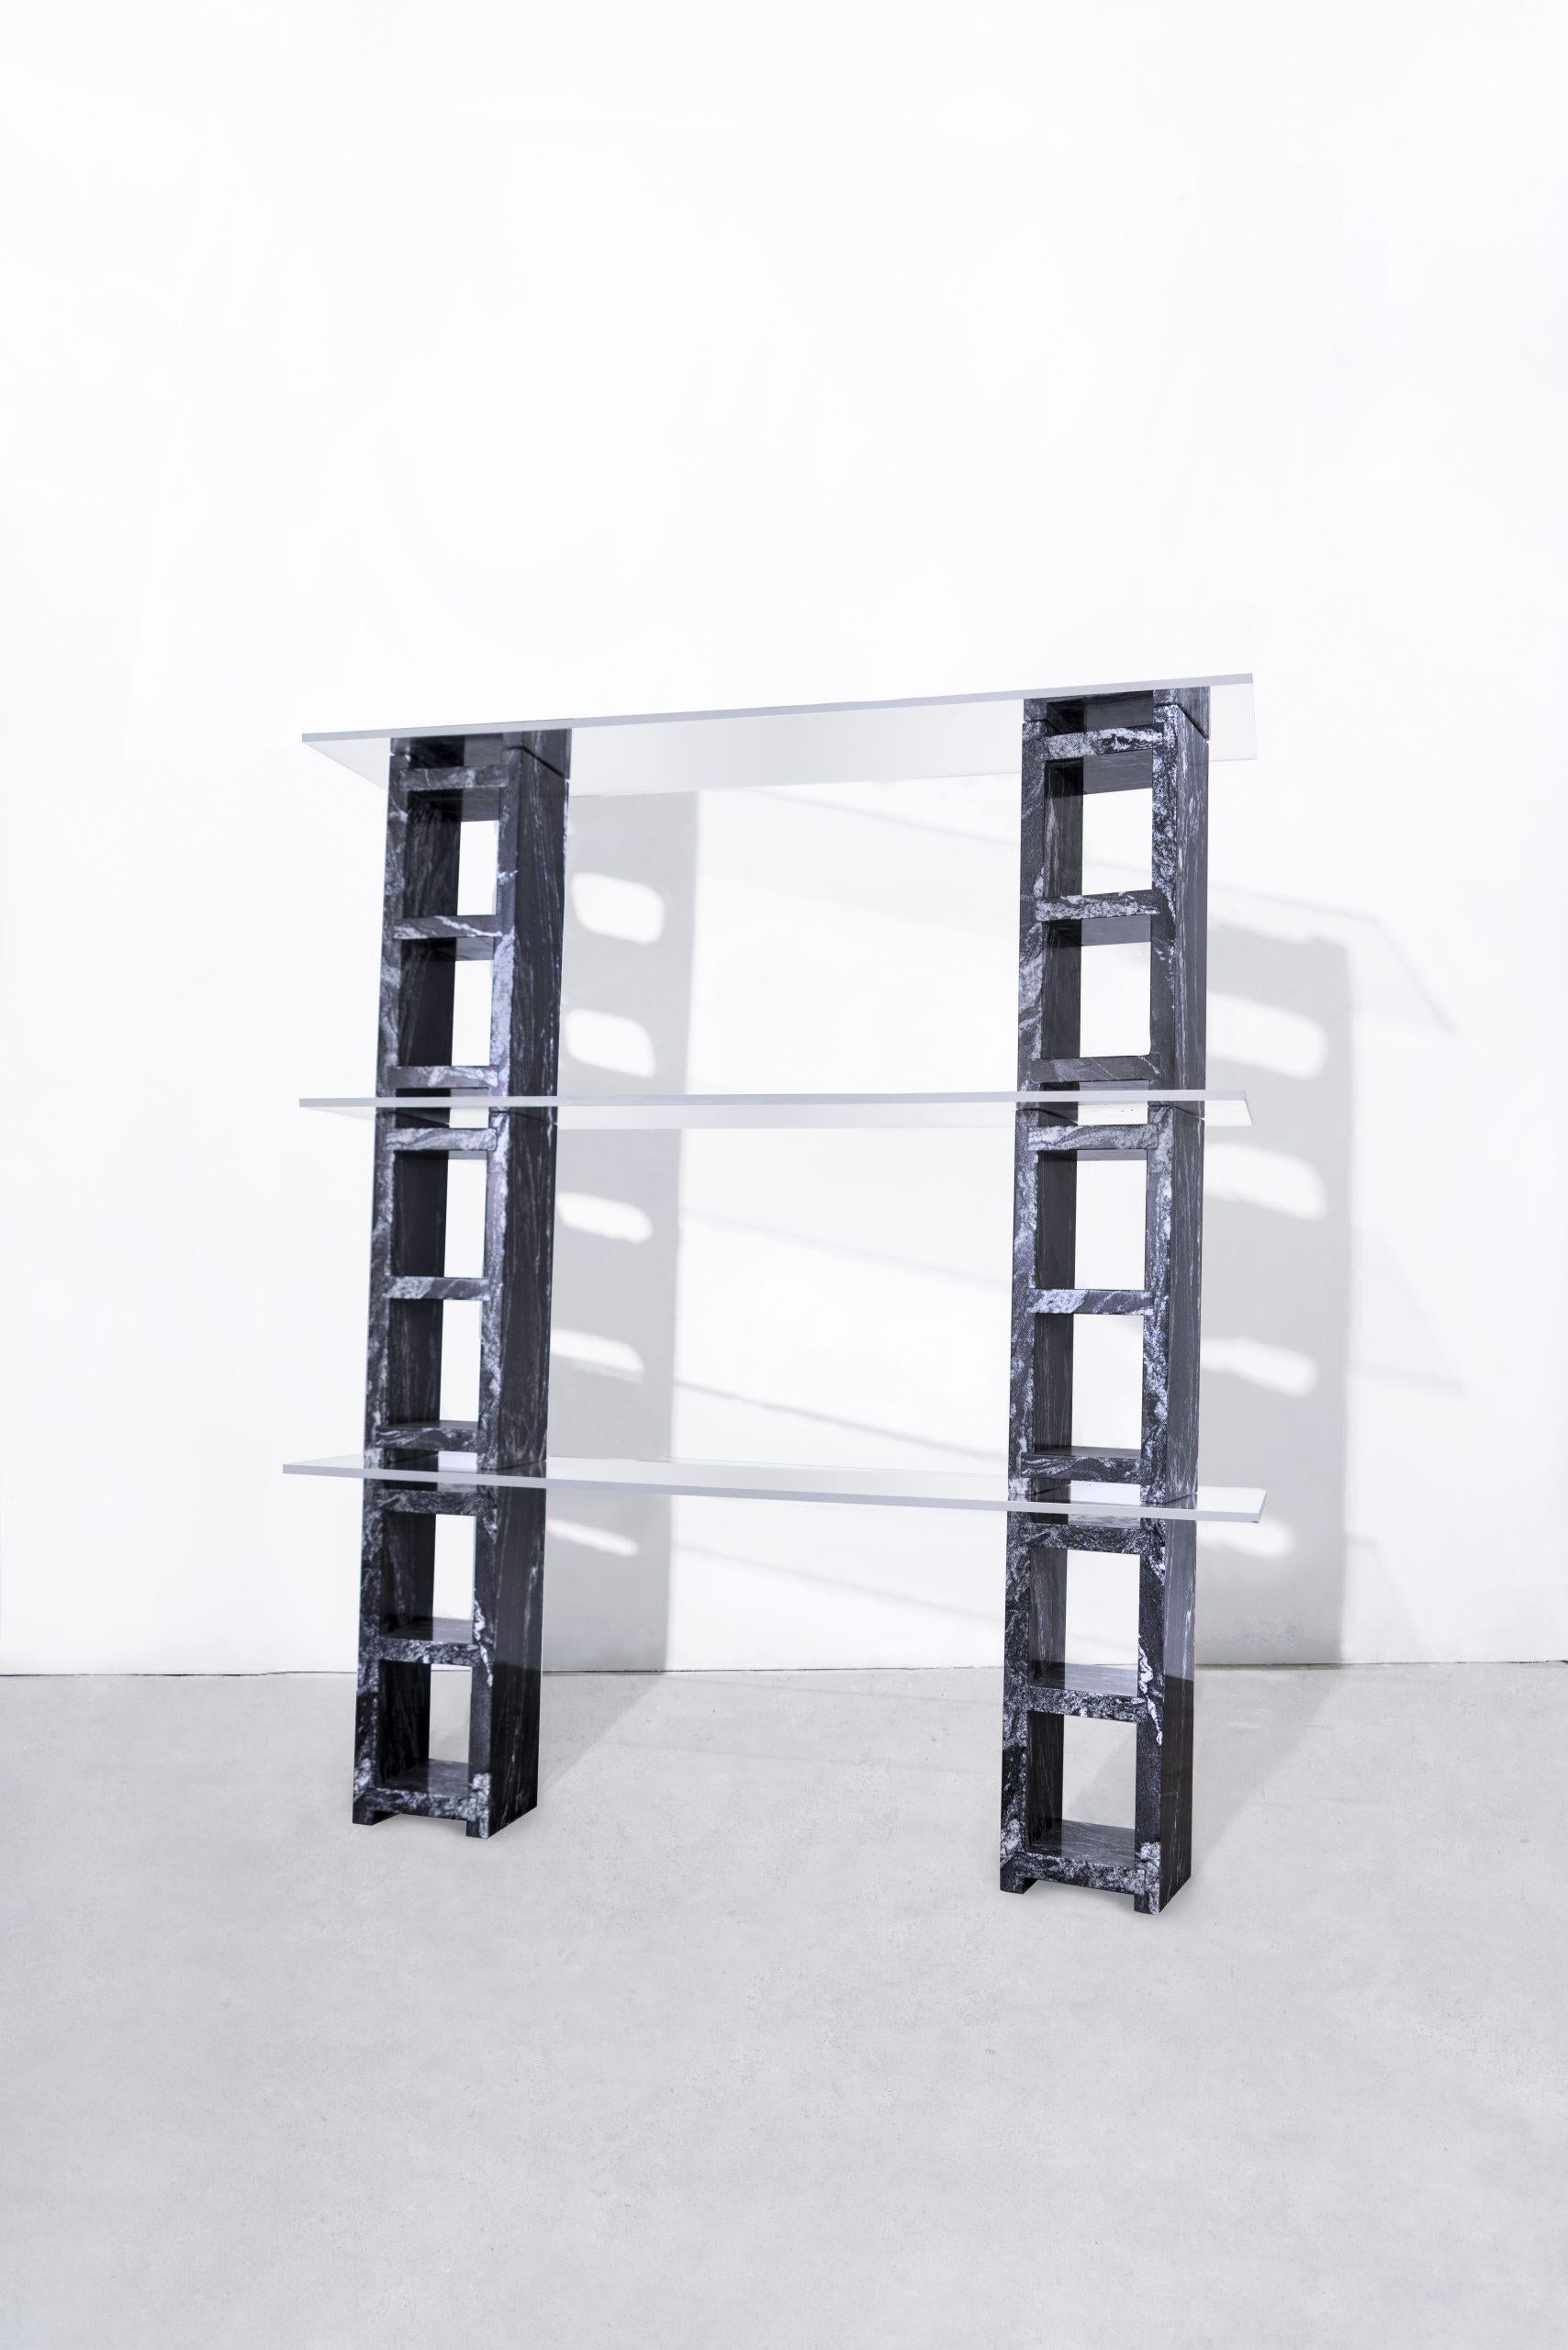 Description
6 water jet cut, hand-polished nero marquina marble blocks, supporting 3 tempered glass shelves.
Starphire glass shelves.
Modular.
Made to order in nyc.

Dimensions
Cinder block length 18.75?
Cinder block width 7.5” 
Cinder